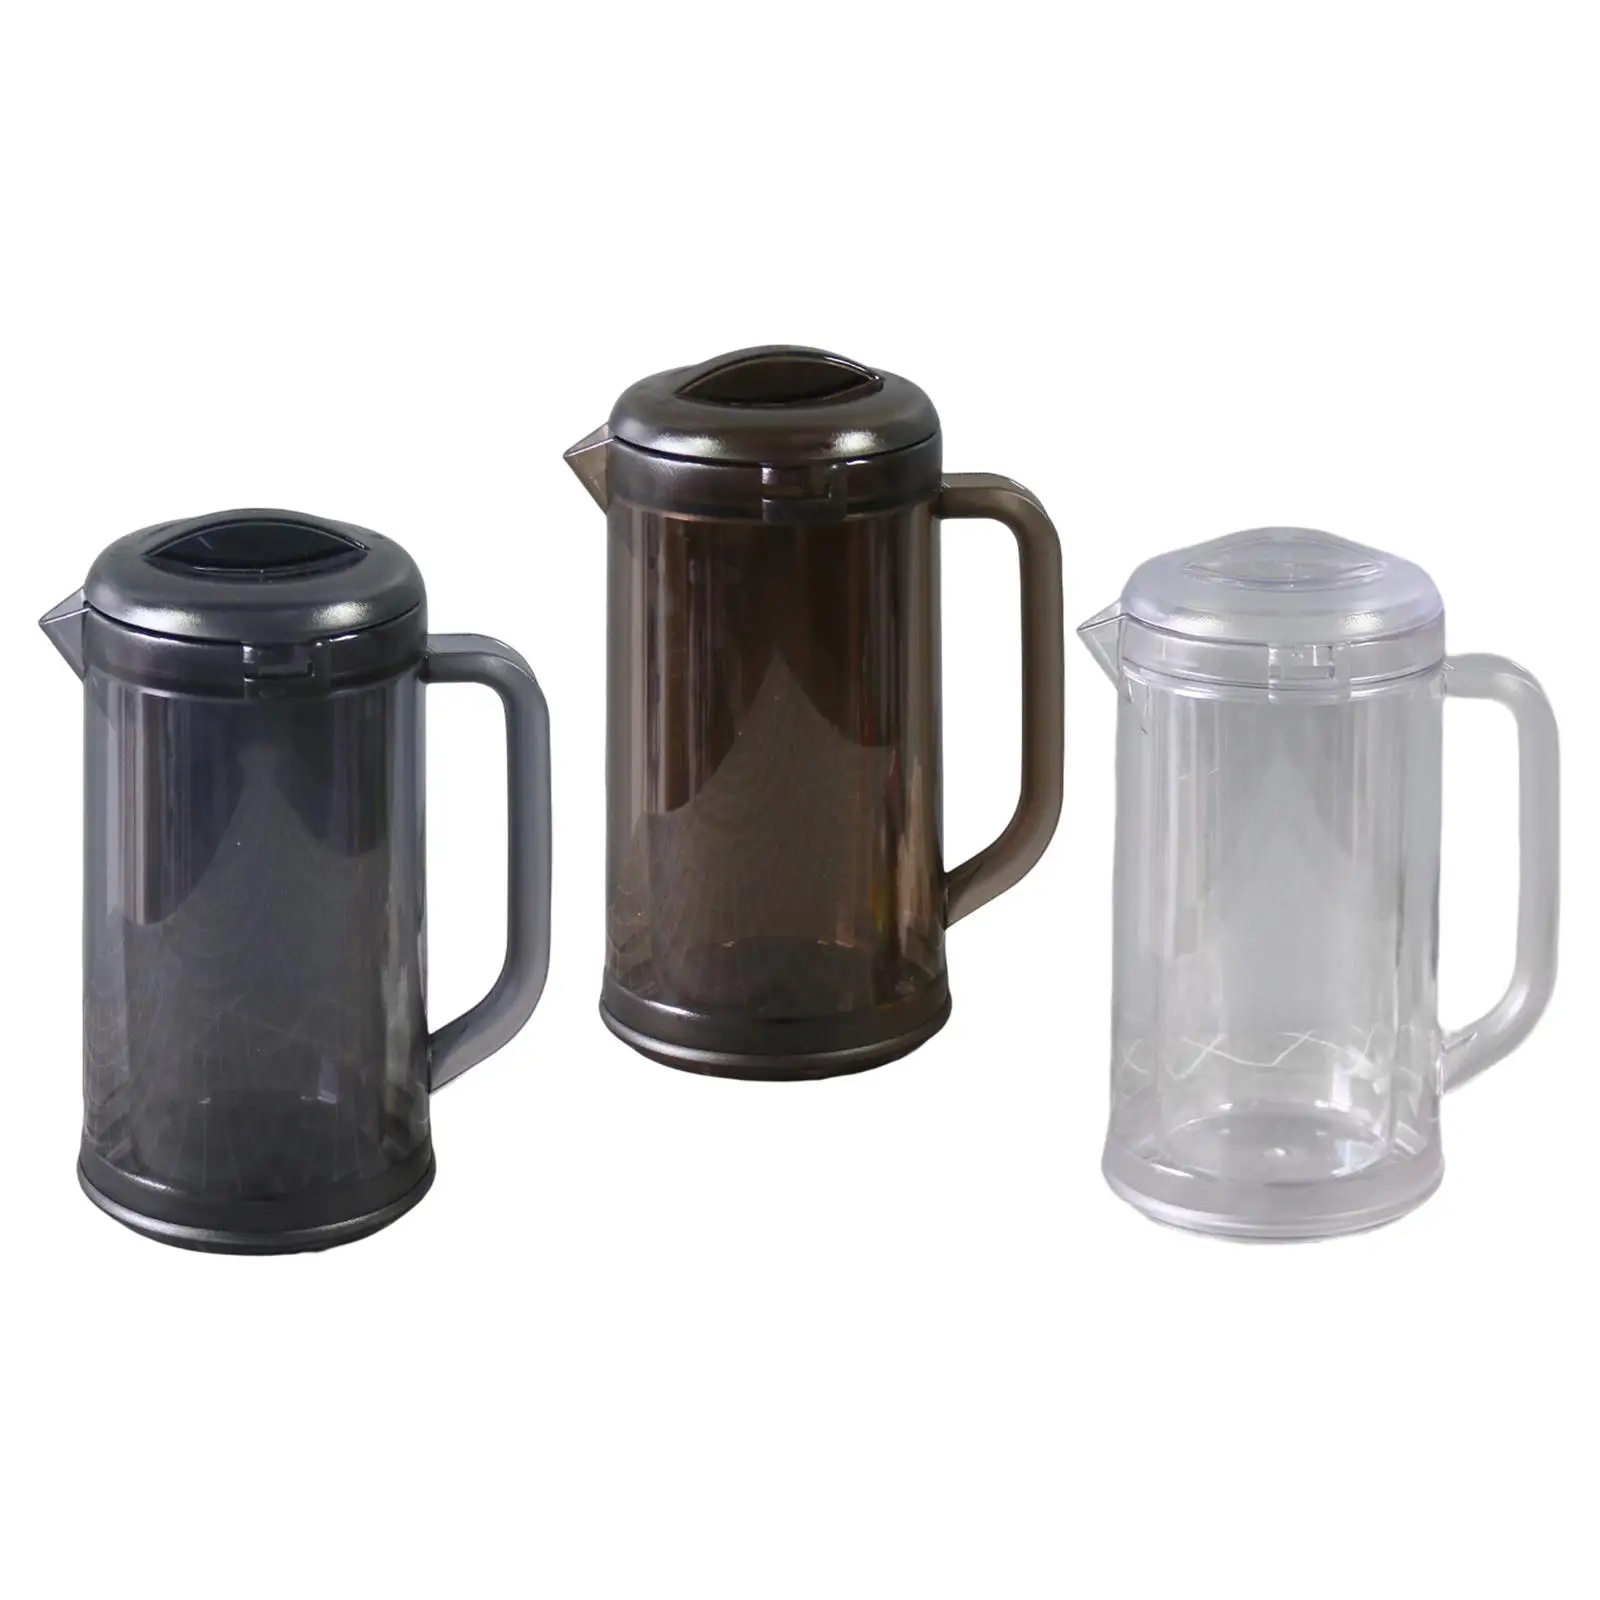 Water Jug Pitcher Easy to Fill Lightweight Leakproof Fridge Jug Teapot Drinkware for Outdoor Drinks Fridge Hot and Cold Iced Tea